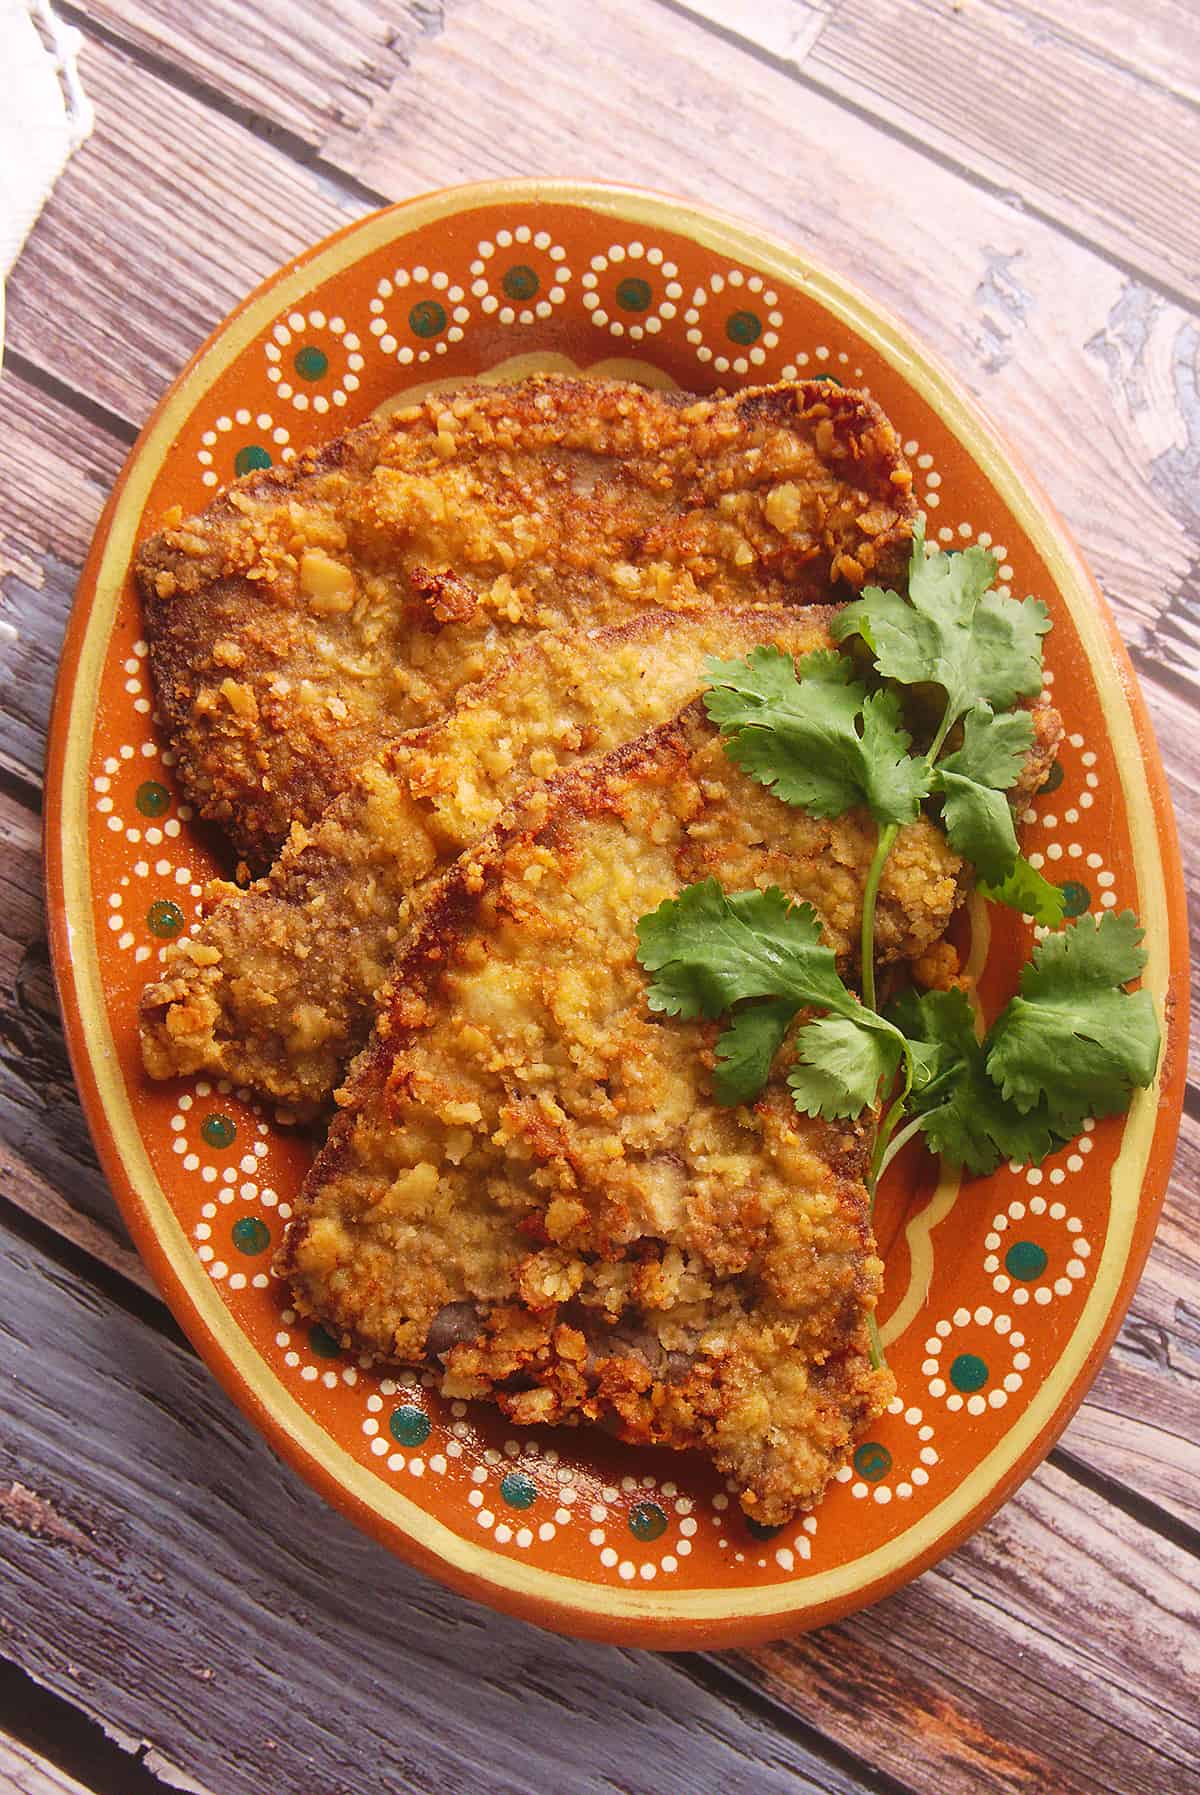 Milanesas de Res served on a plate